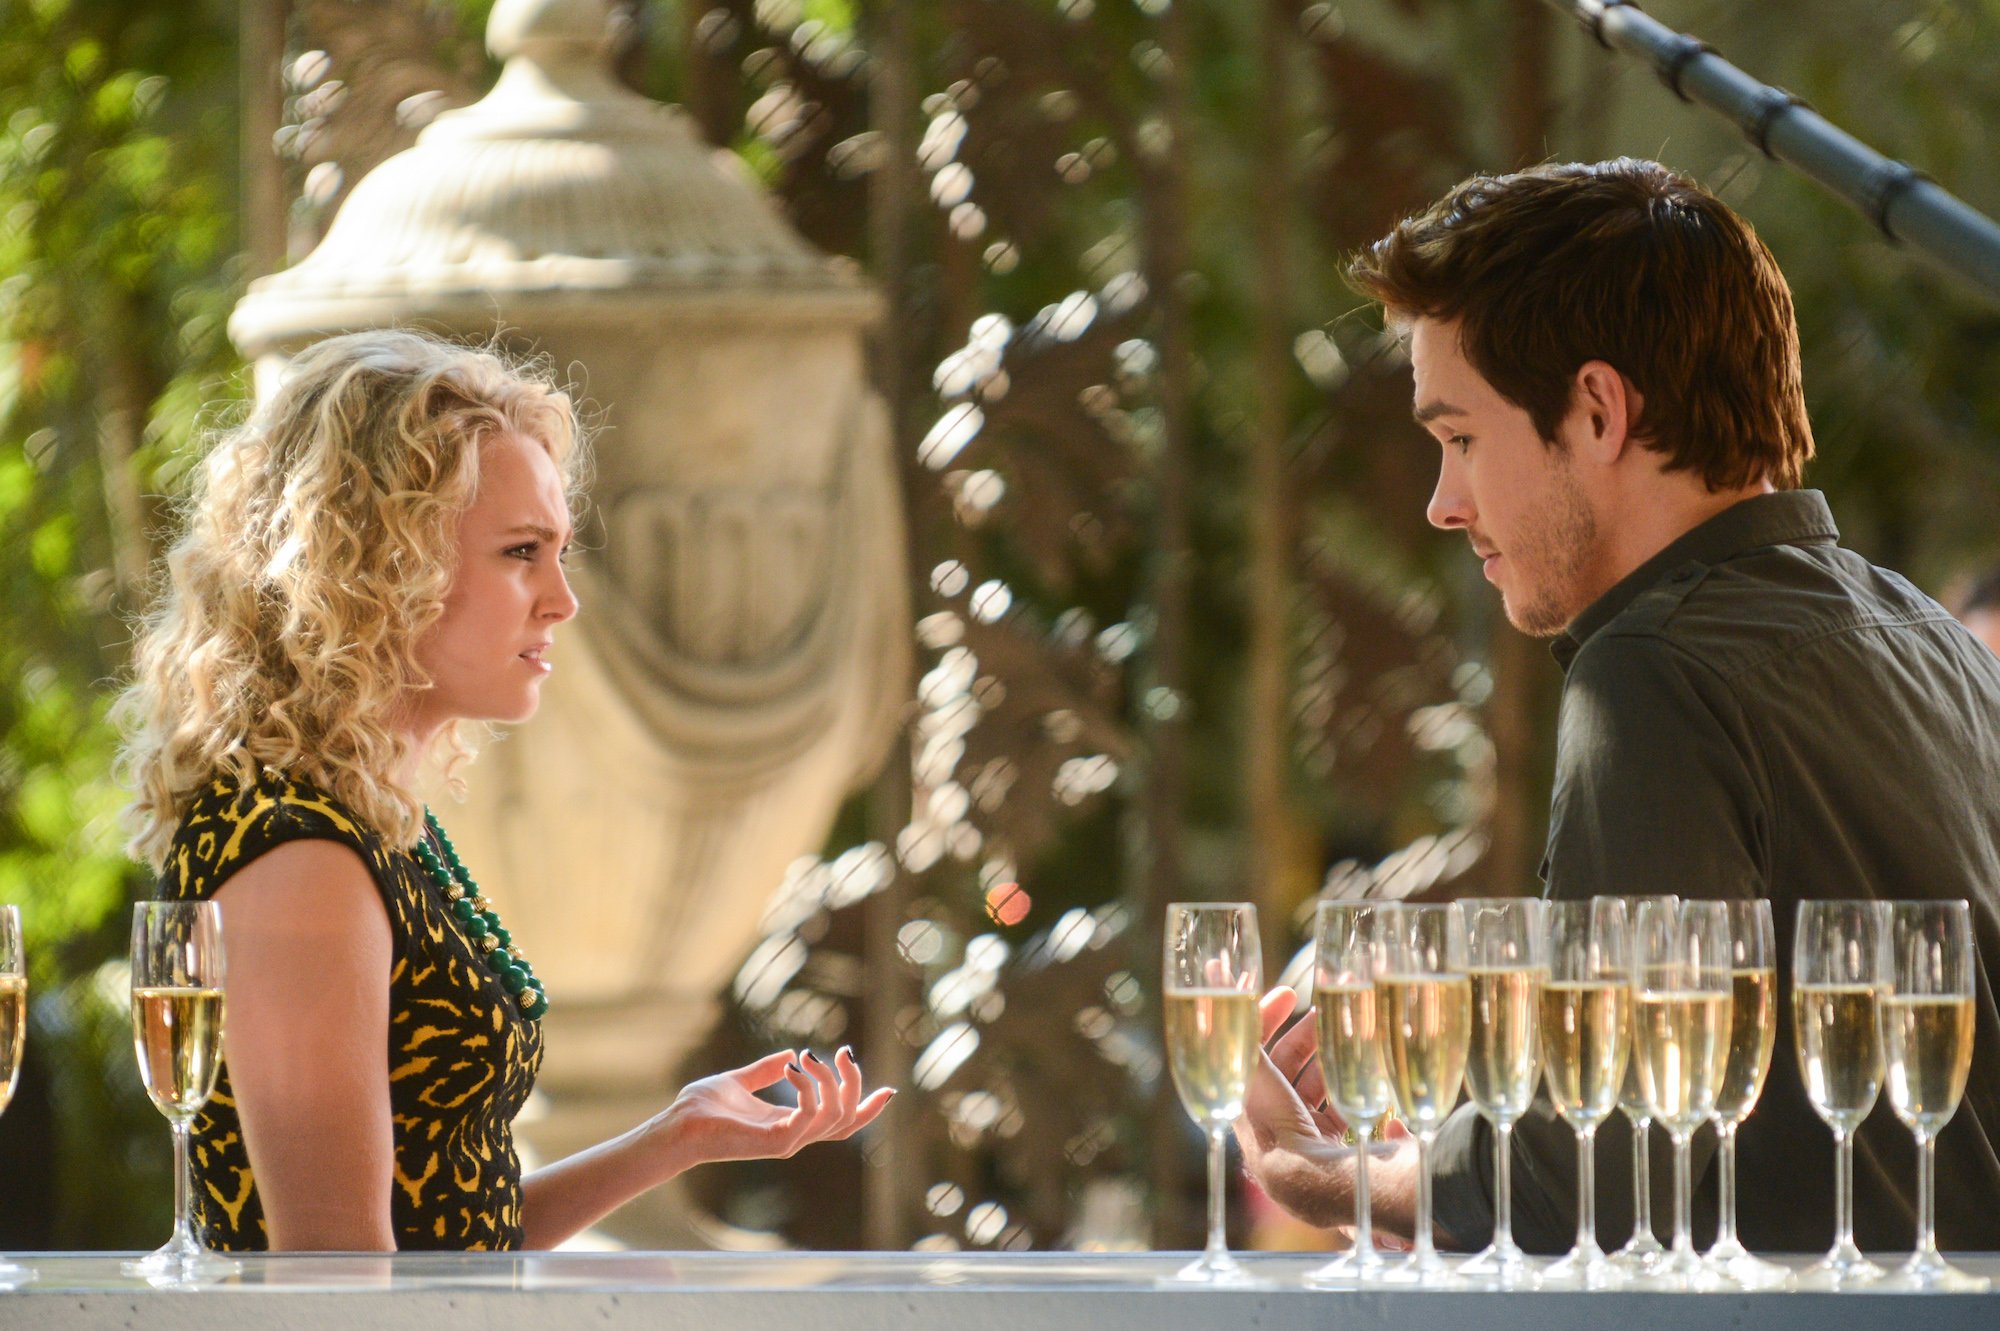 How to Stream ‘The Carrie Diaries’ For Free